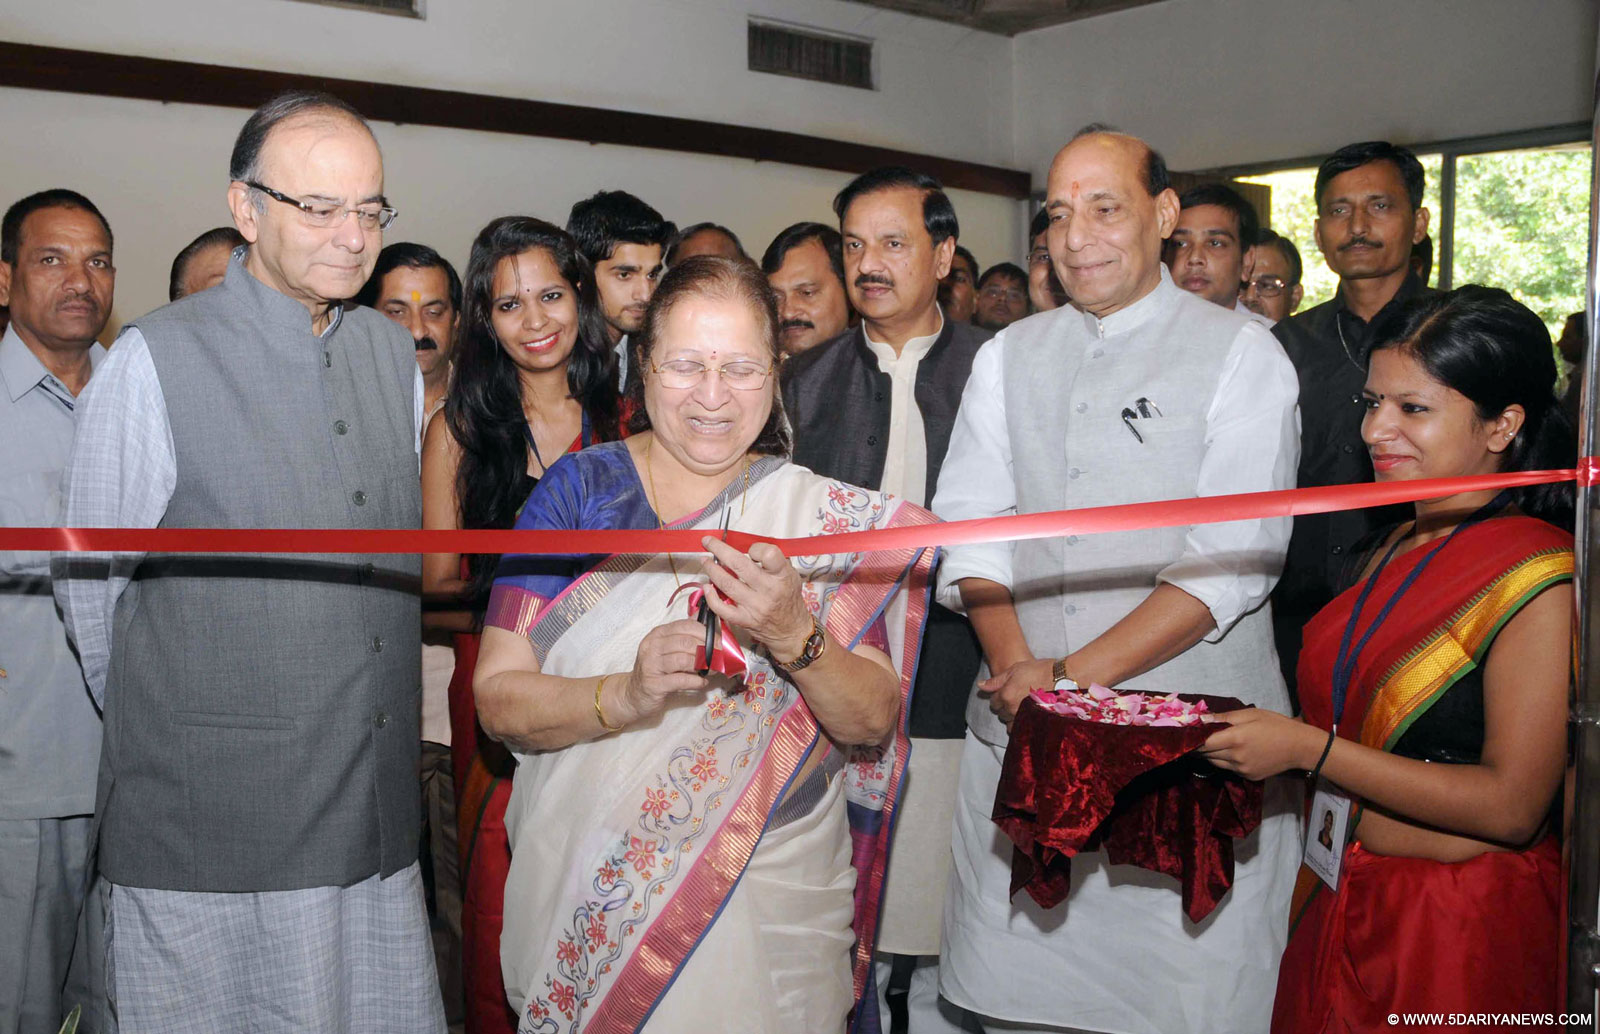 The Speaker, Lok Sabha, Smt. Sumitra Mahajan inaugurating the Birth Anniversary Celebrations of Pandit Deendayal Upadhyaya, in New Delhi on September 25, 2015. The Union Home Minister, Shri Rajnath Singh, the Union Minister for Finance, Corporate Affairs and Information & Broadcasting, Shri Arun Jaitley and the Minister of State for Culture (Independent Charge), Tourism (Independent Charge) and Civil Aviation, Dr. Mahesh Sharma are also seen.